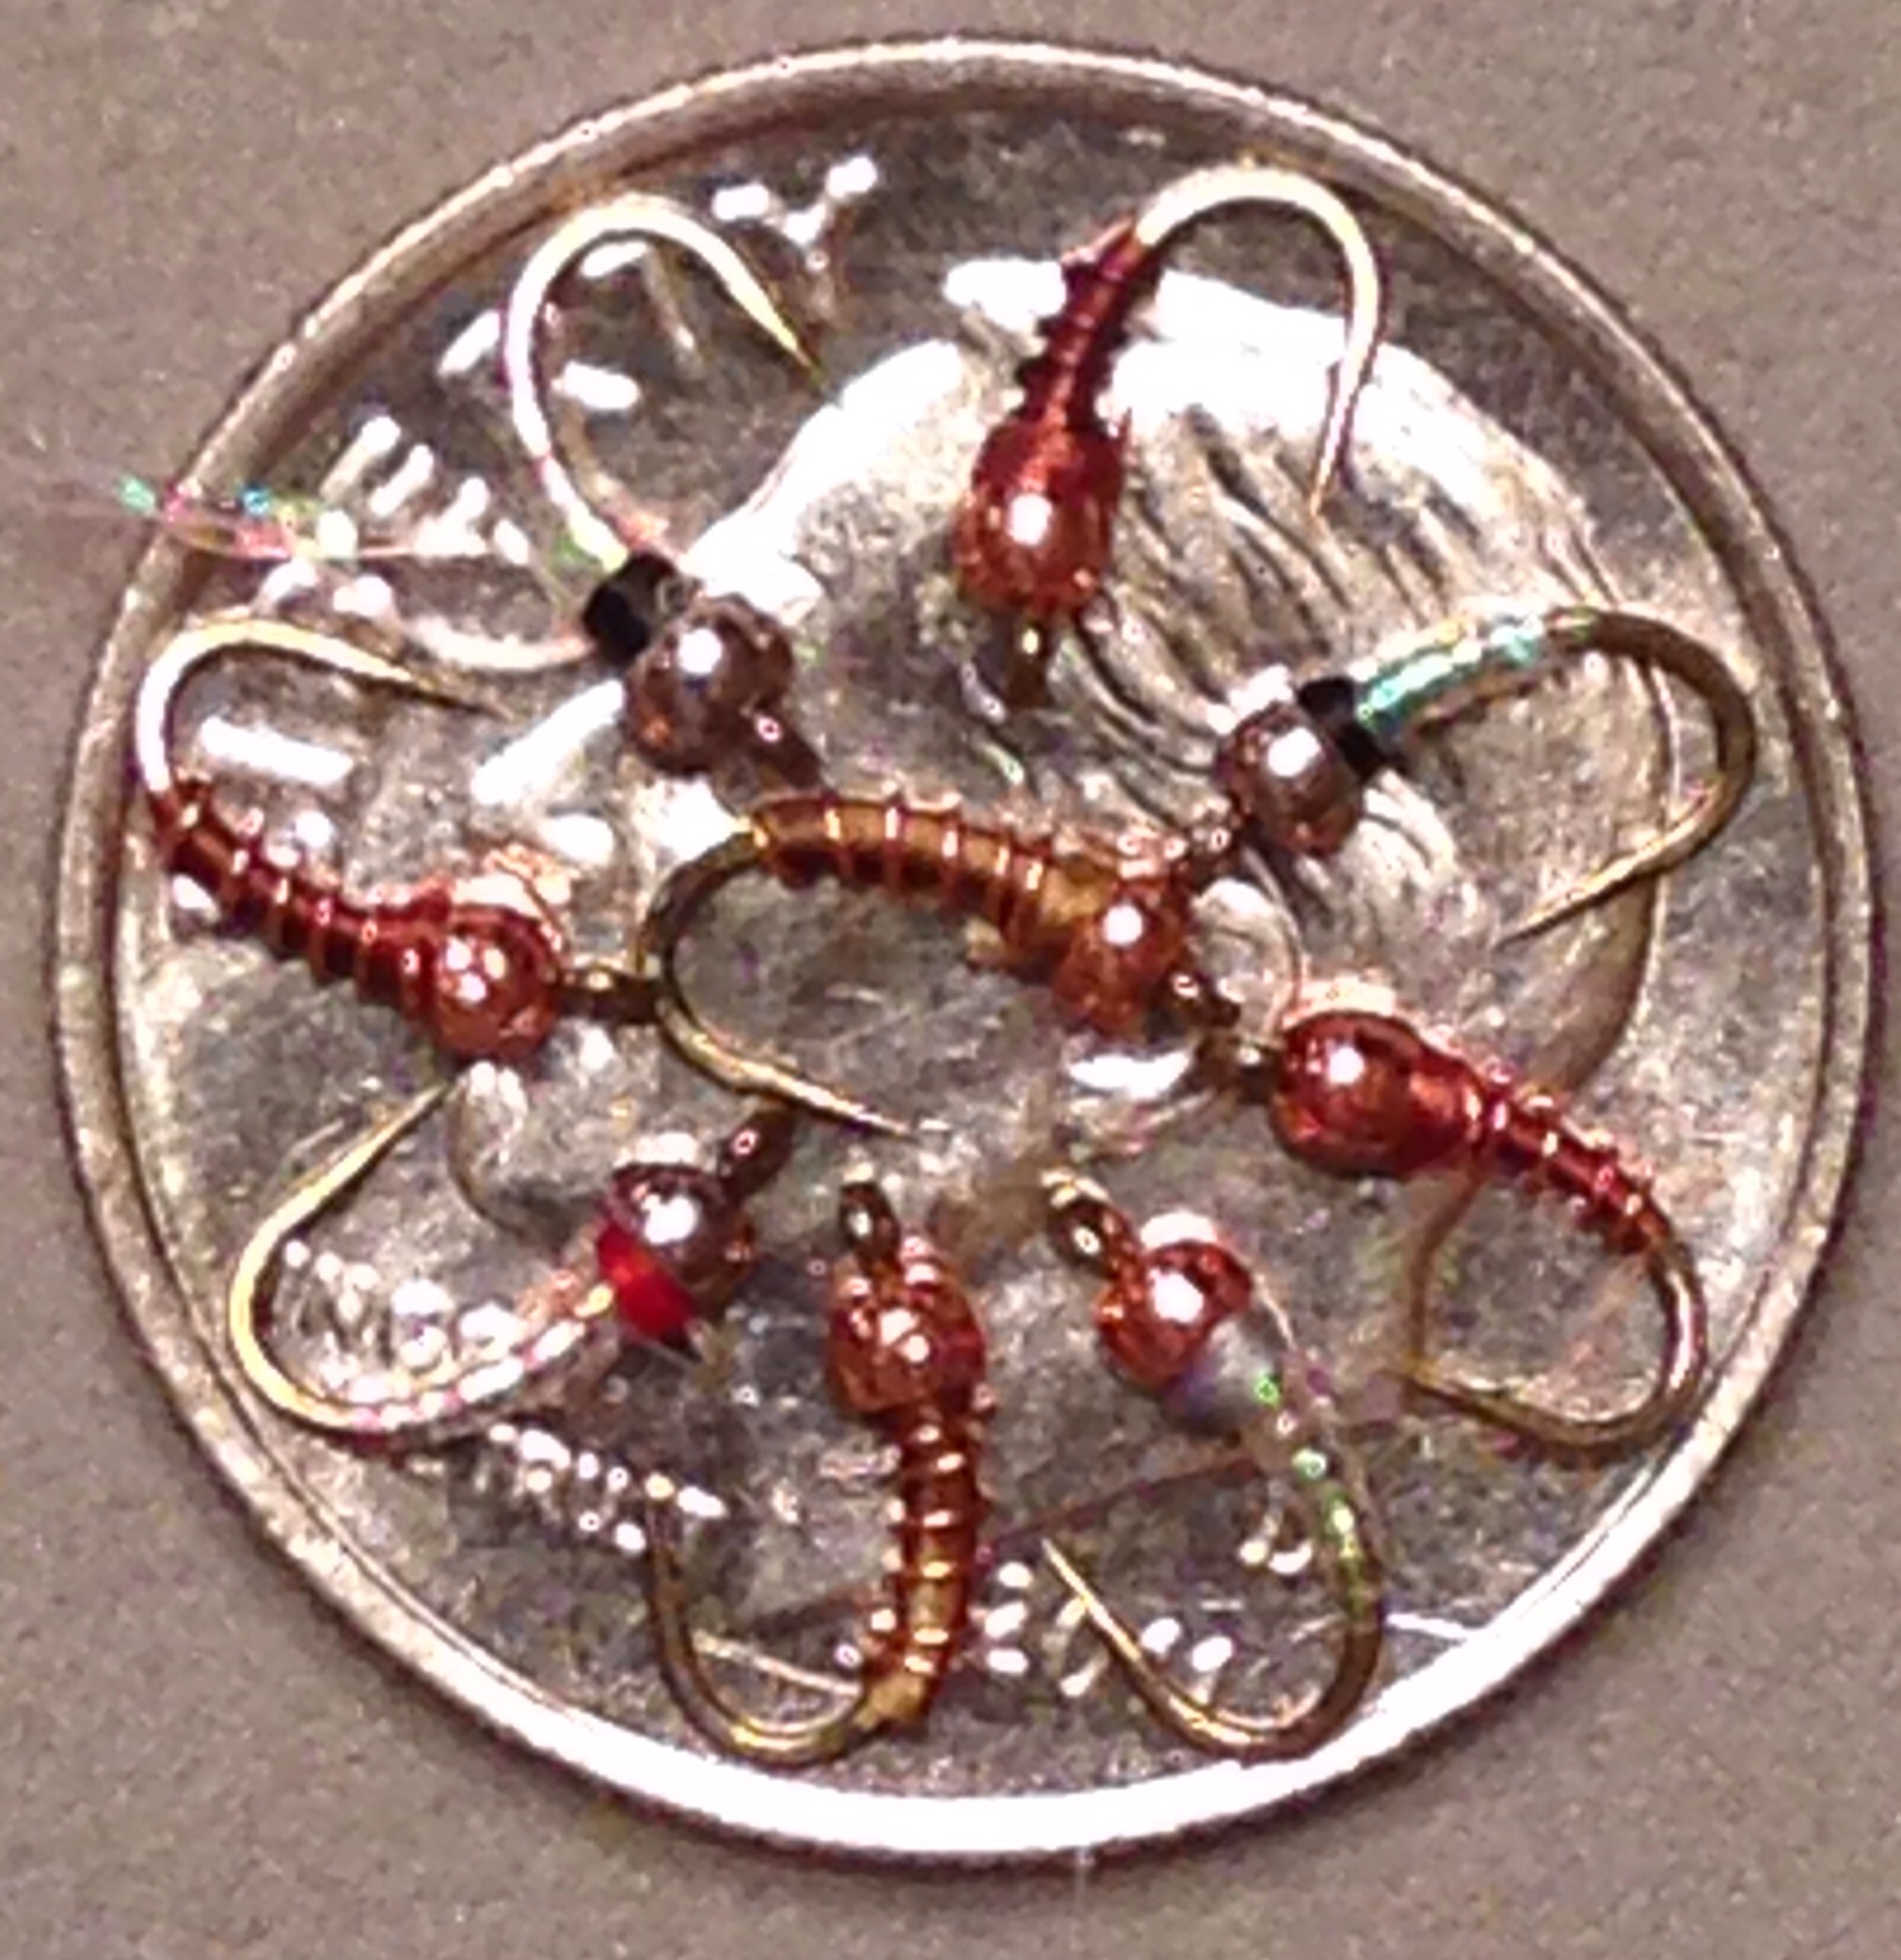 Nine on a Dime size 22 midge patterns. – NWATROUT Fly Fishing Guide